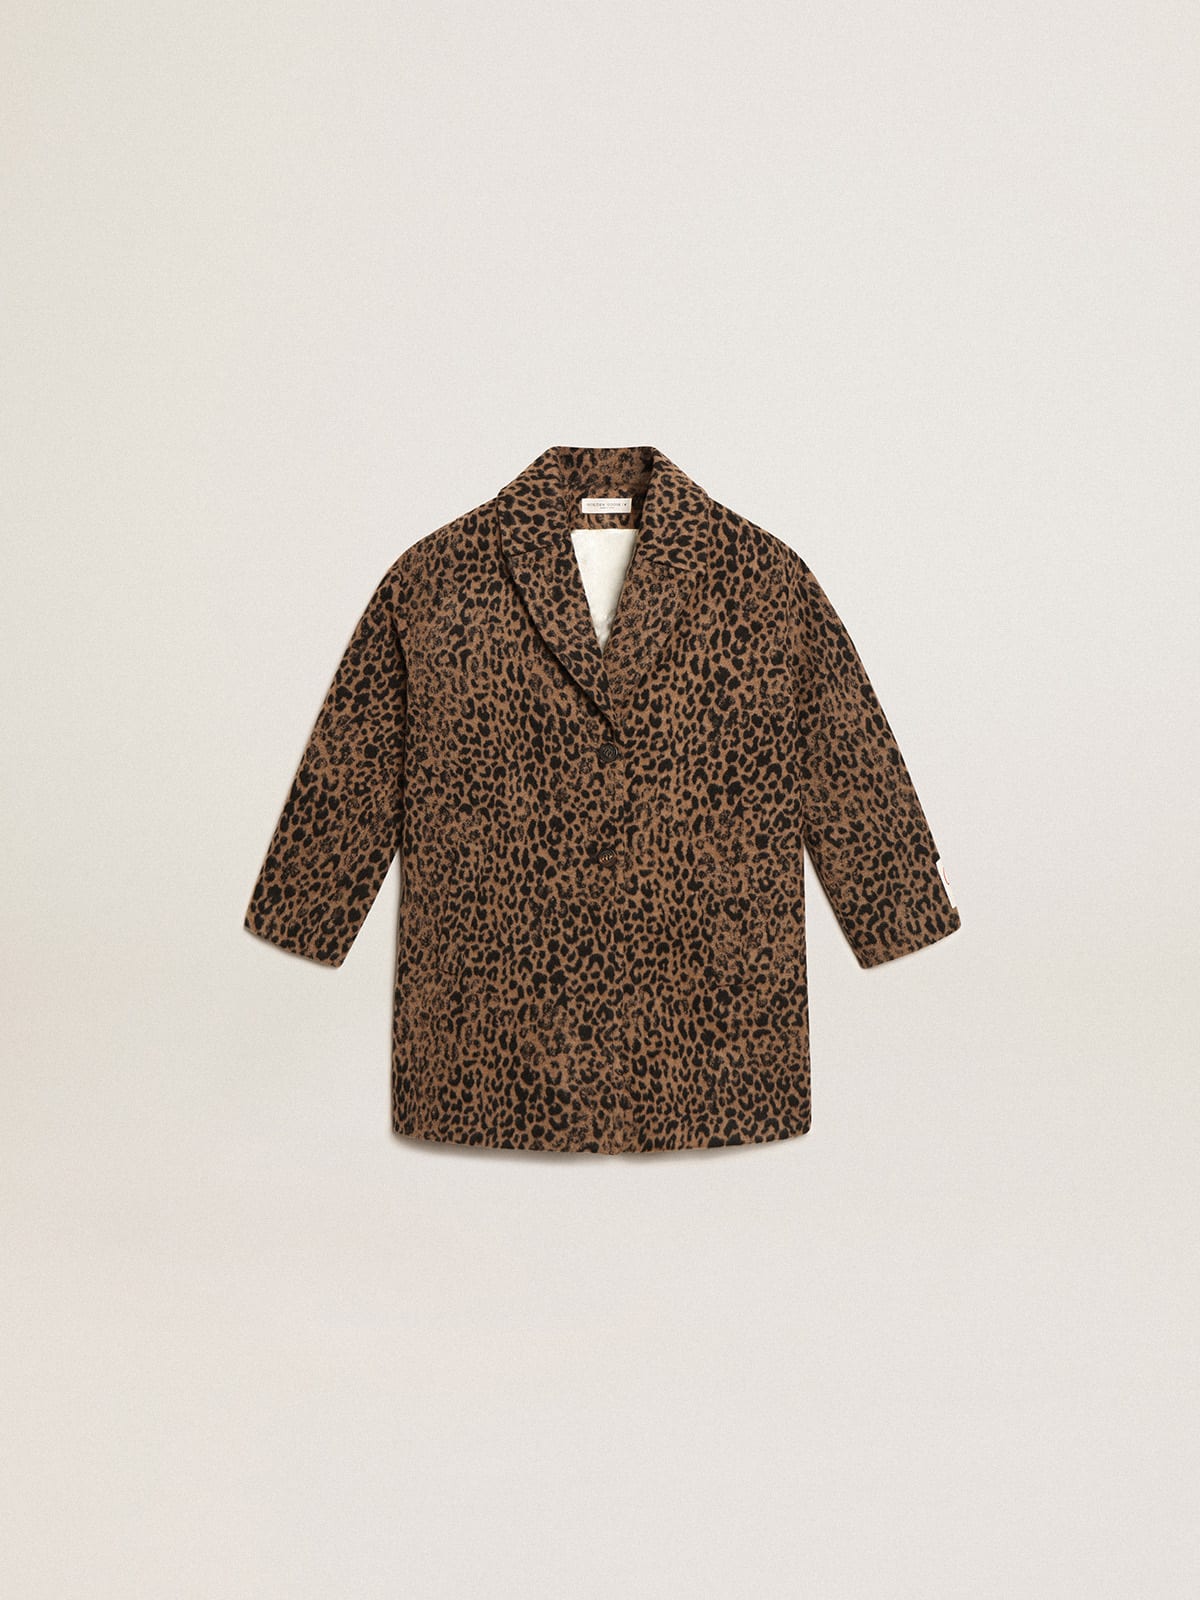 Girls' single-breasted blazer in wool with jacquard animal print